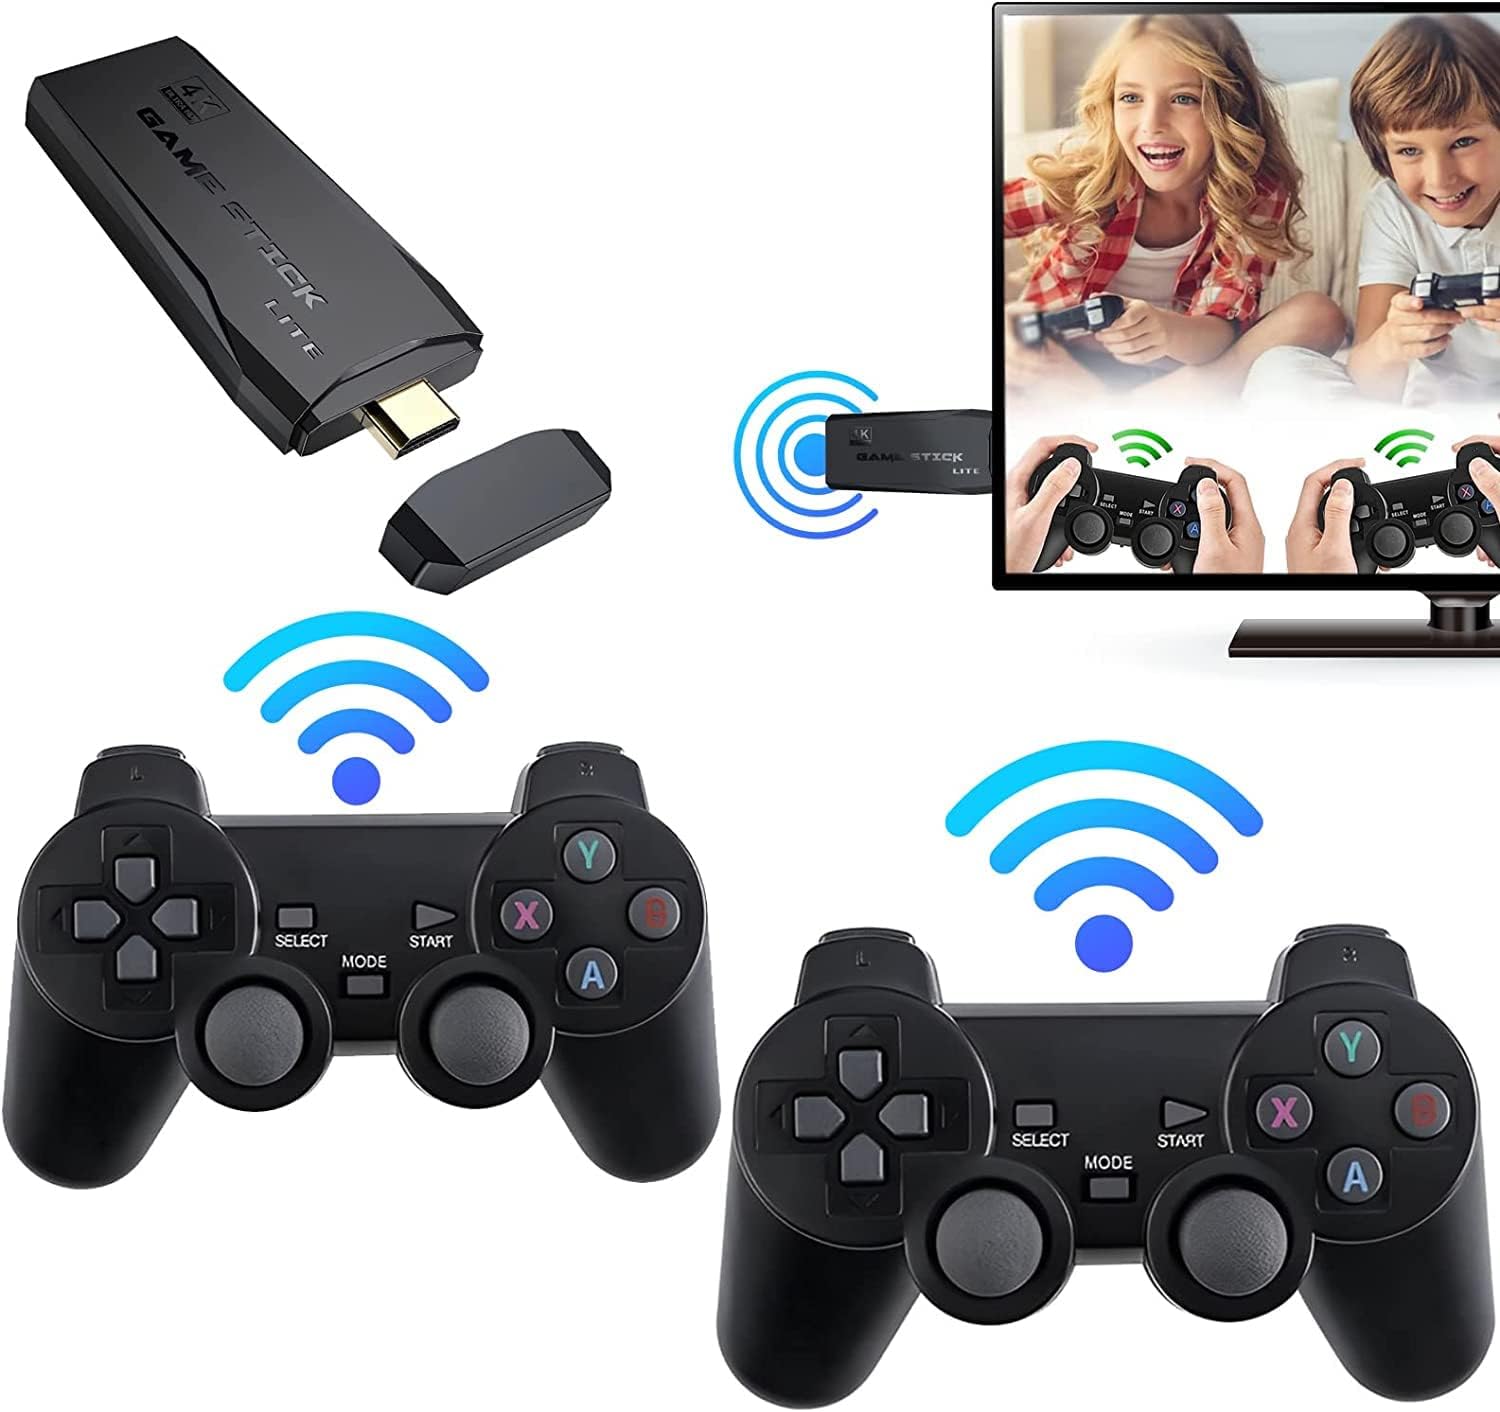 Wireless Retro Game Console,Retro Game Stick,Nostalgia Stick Game,4K HDMI Output,Plug and Play Video Game Stick Built in 10000+ Games,9 Classic Emulators, with Dual 2.4G Wireless Controllers(64G)